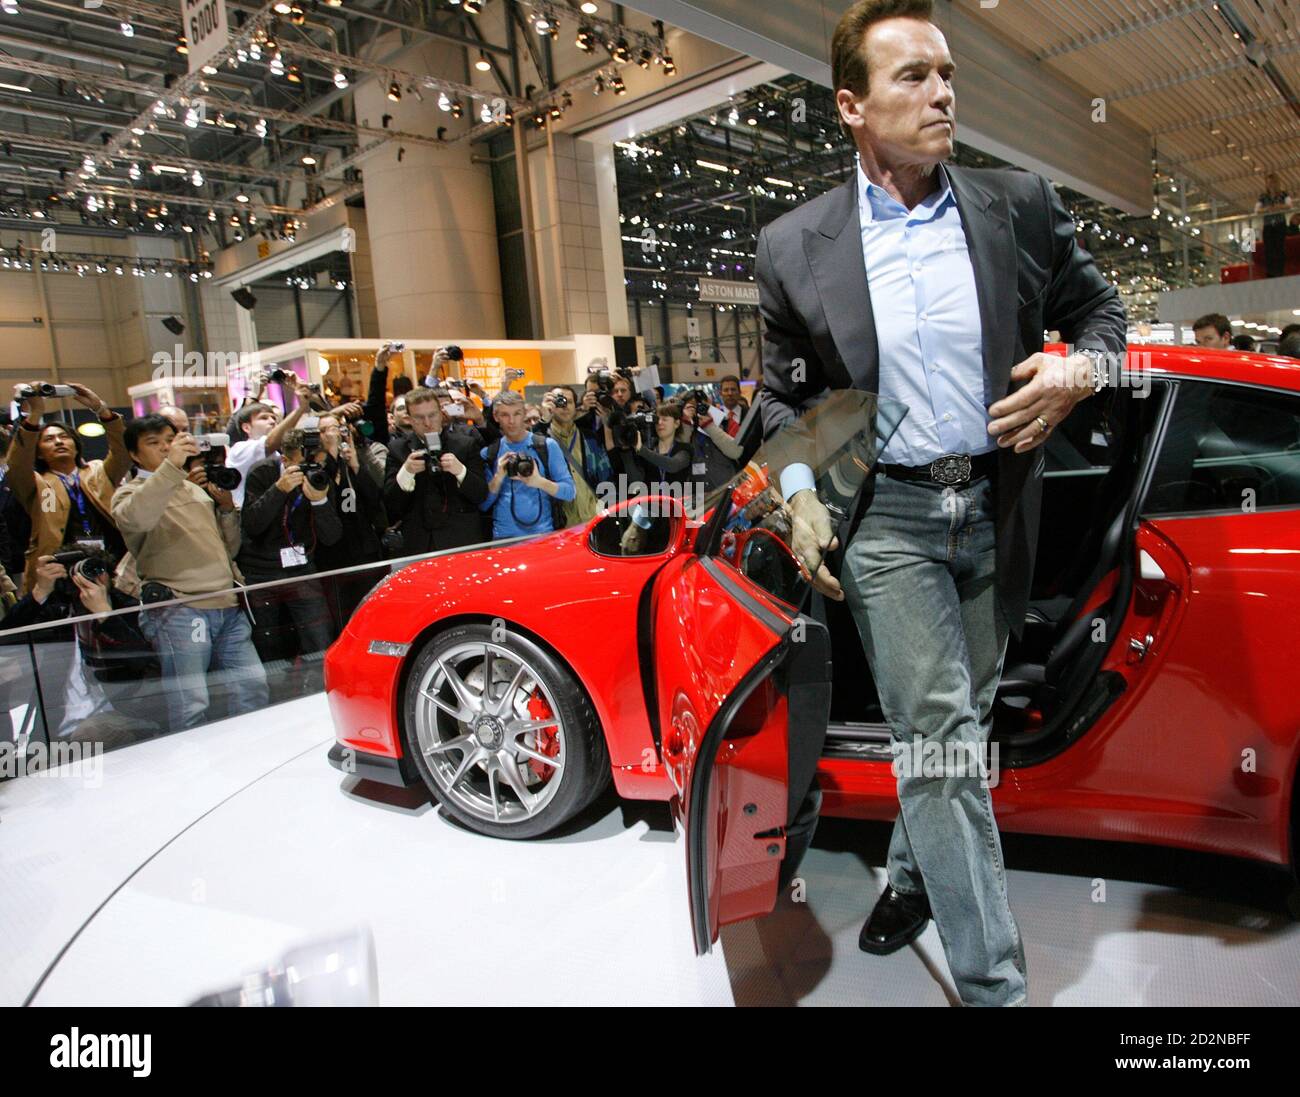 California Governor Arnold Schwarzenegger gets out of a GT3 Porsche during  the second media day of the 79th Geneva Car Show at the Palexpo in Geneva  March 4, 2009. REUTERS/Denis Balibouse (SWITZERLAND